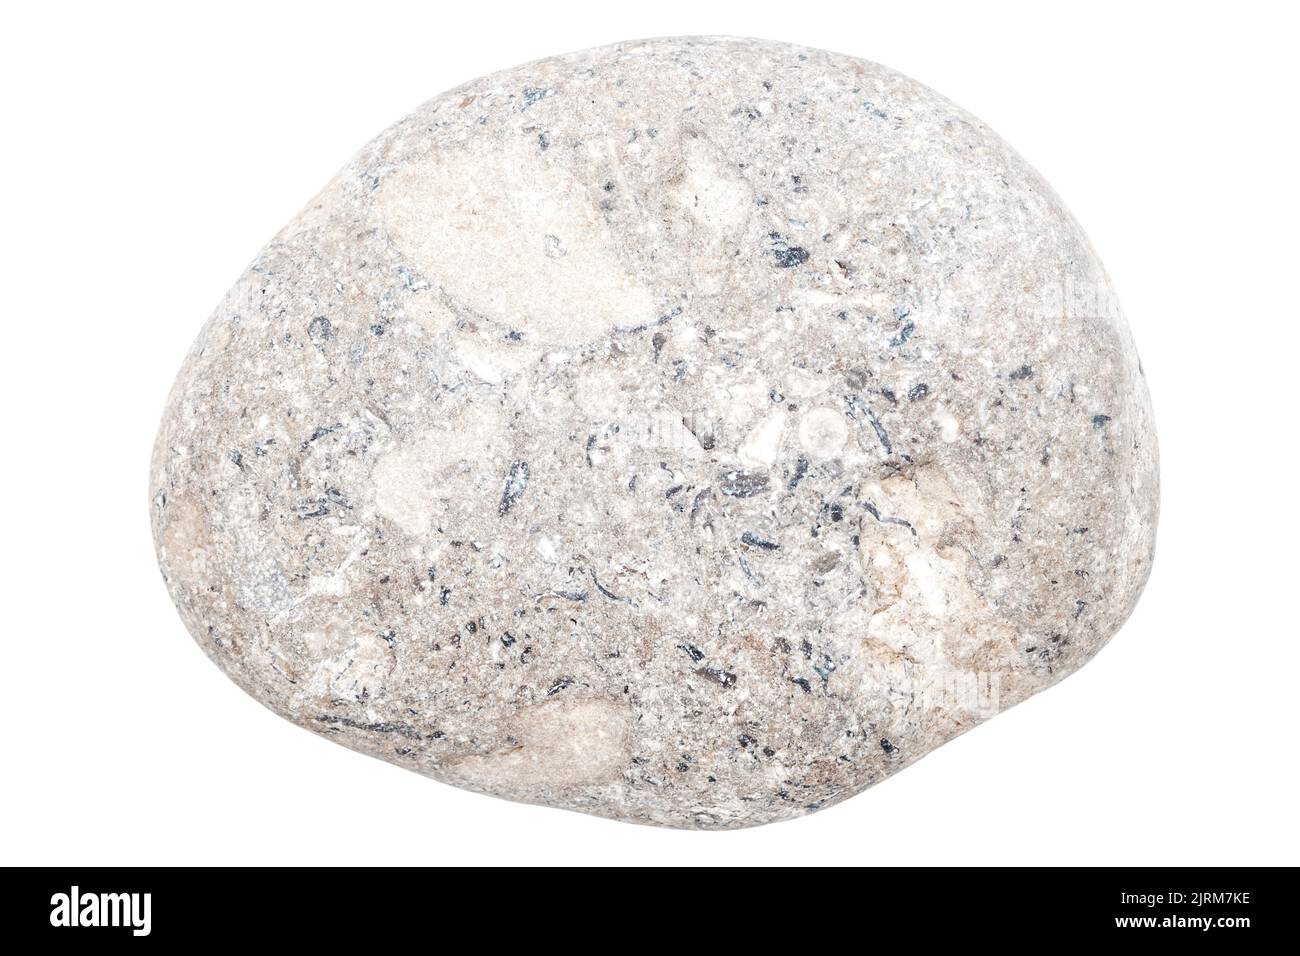 Top view of single gray pebble isolated on white background. Stock Photo